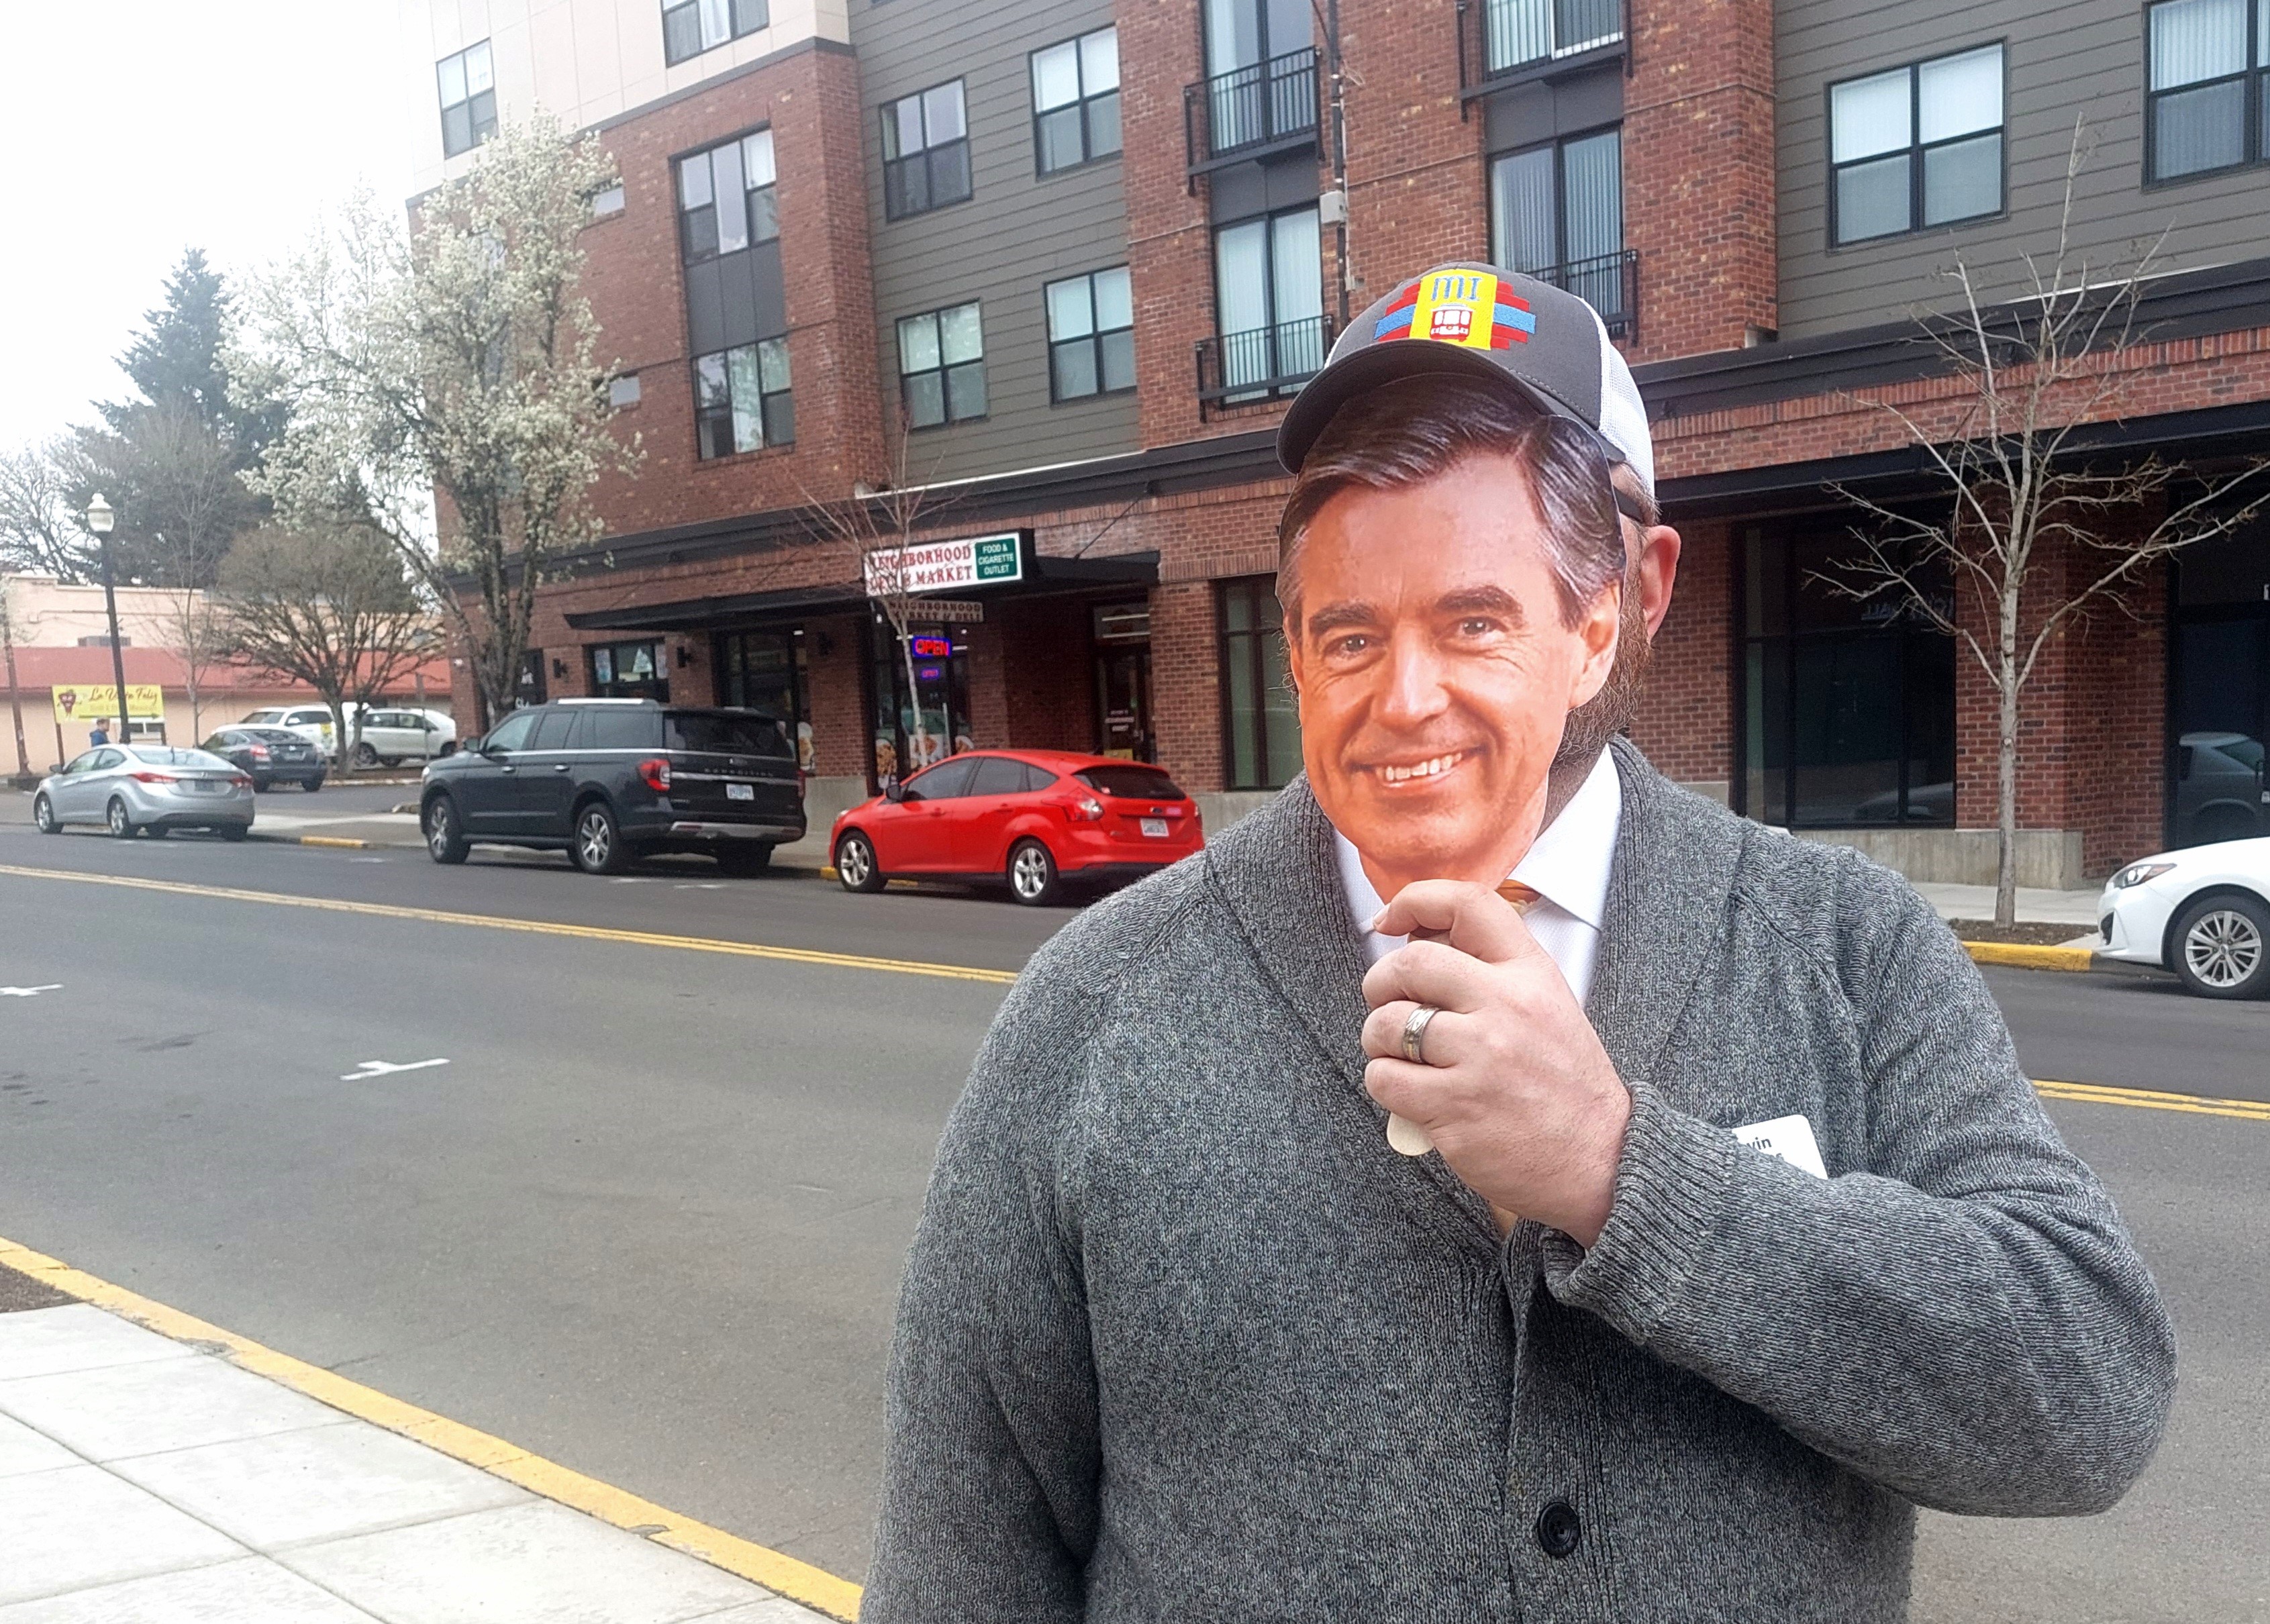 Wearing a gray cardigan sweater and holding a photo of fred rogers in front of his face, Kevin Parks poses for a photo